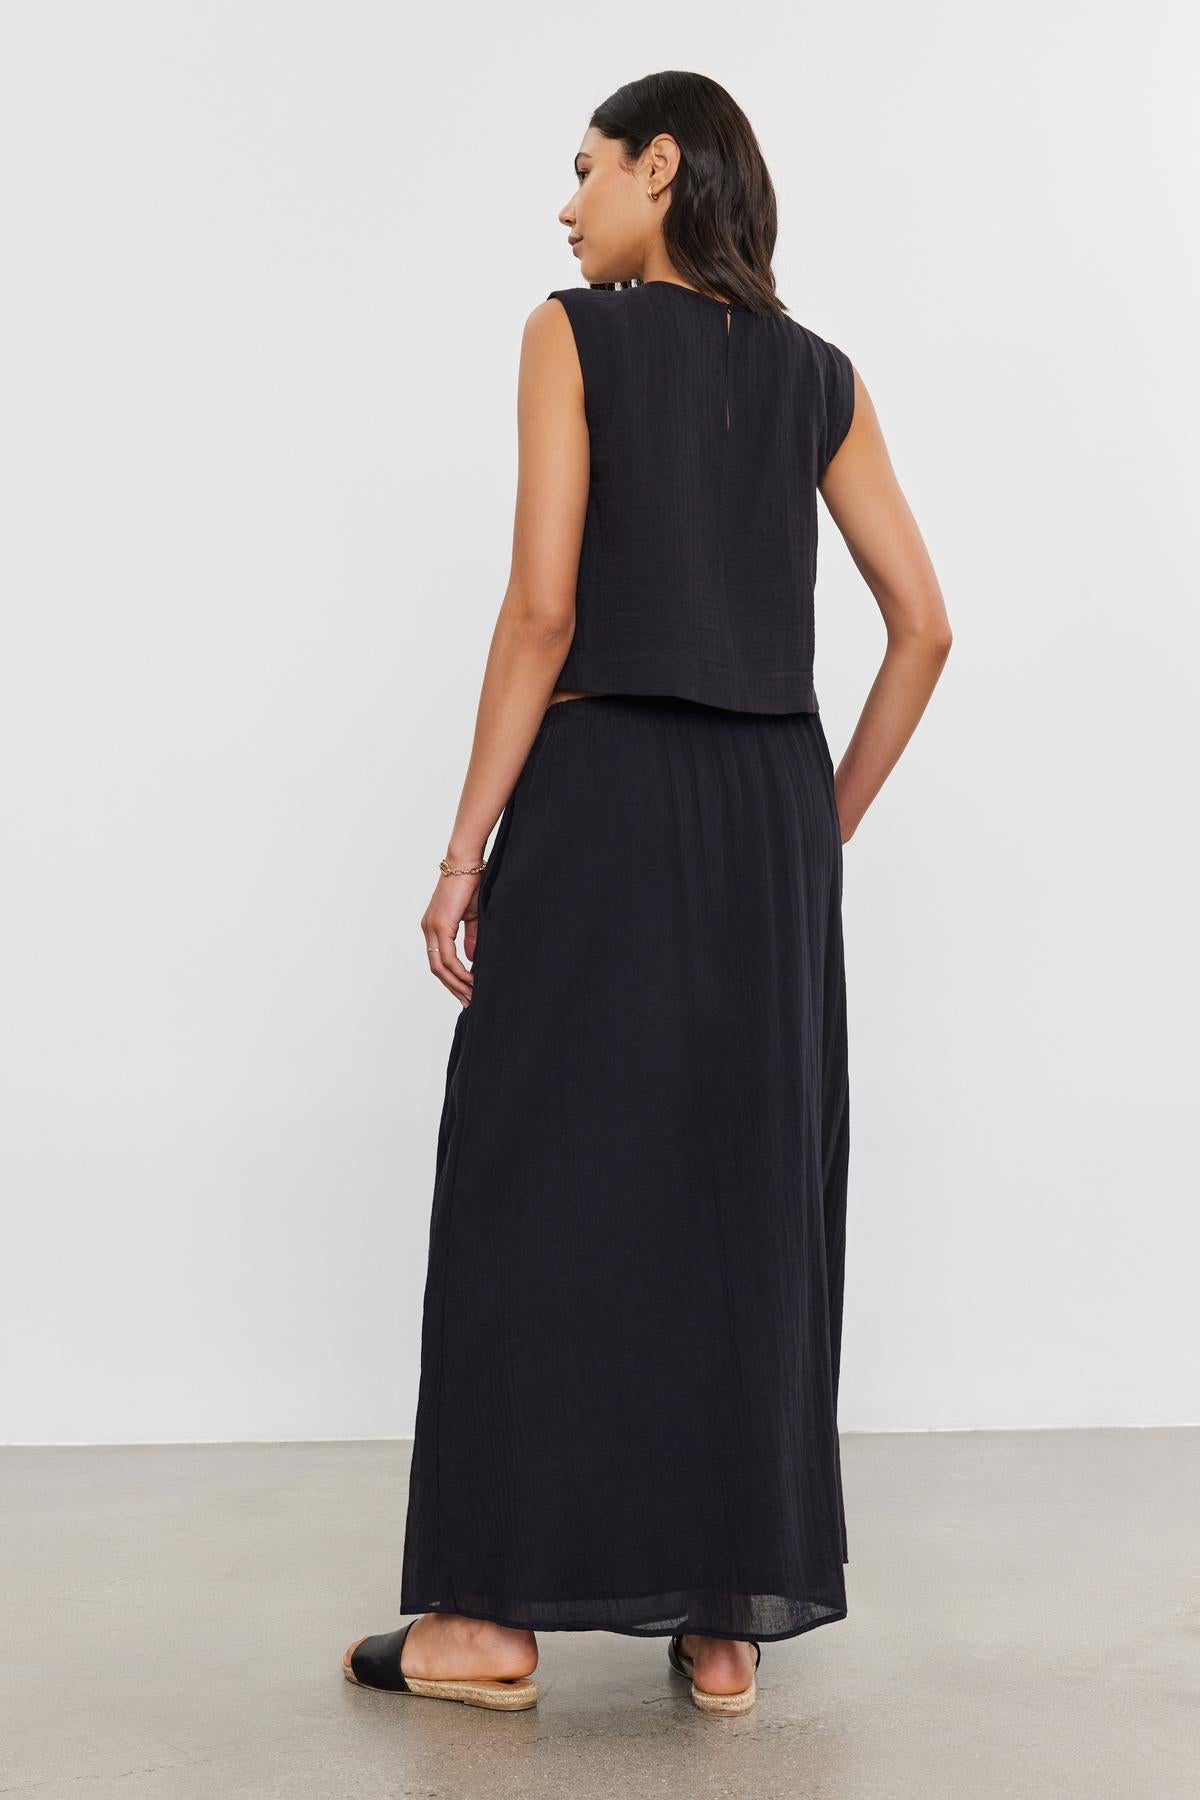 A woman in a black sleeveless maxi dress with an elastic waist skirt, viewed from behind, stands in a plain room, showcasing the back detail of the Velvet by Graham & Spencer INDY COTTON GAUZE SKIRT.-36910123614401